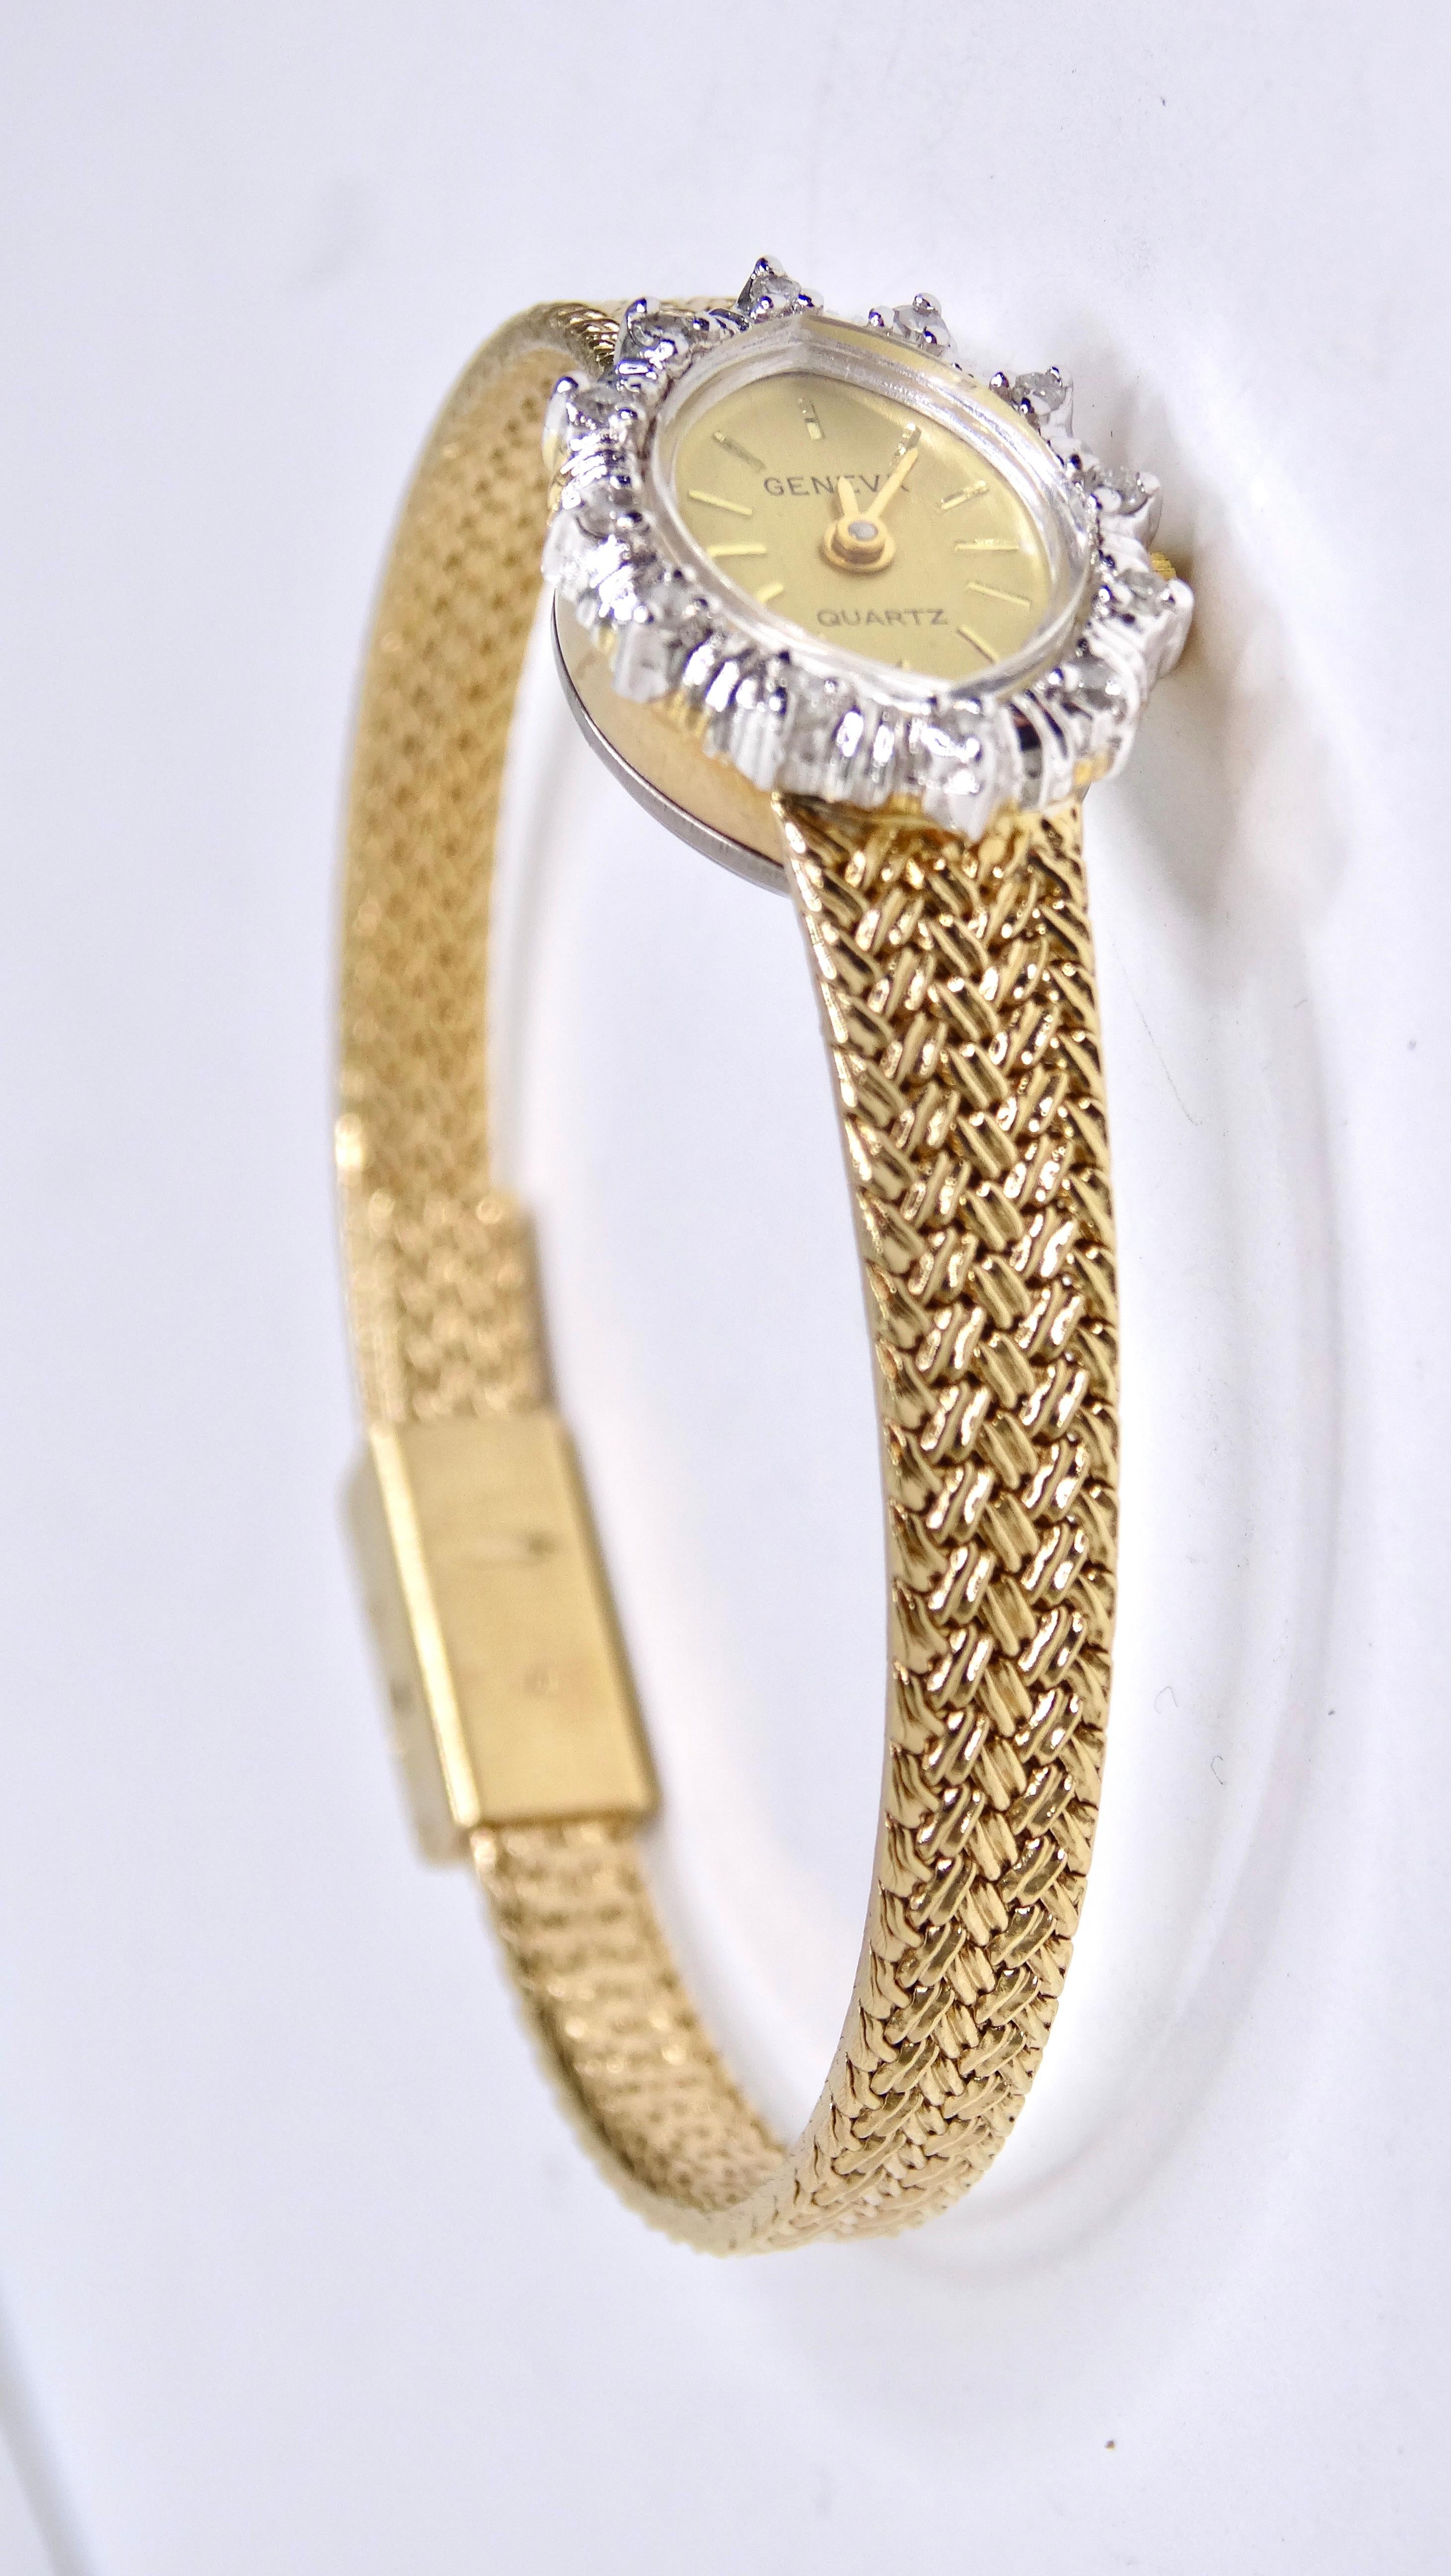 This is an original, authentic Geneve quartz 14K yellow gold watch - Ladies model with an approximate 1.50 carats of total diamond weight! This is a luxury Swiss watch with a quartz movement! This watch has the original face, a beautiful